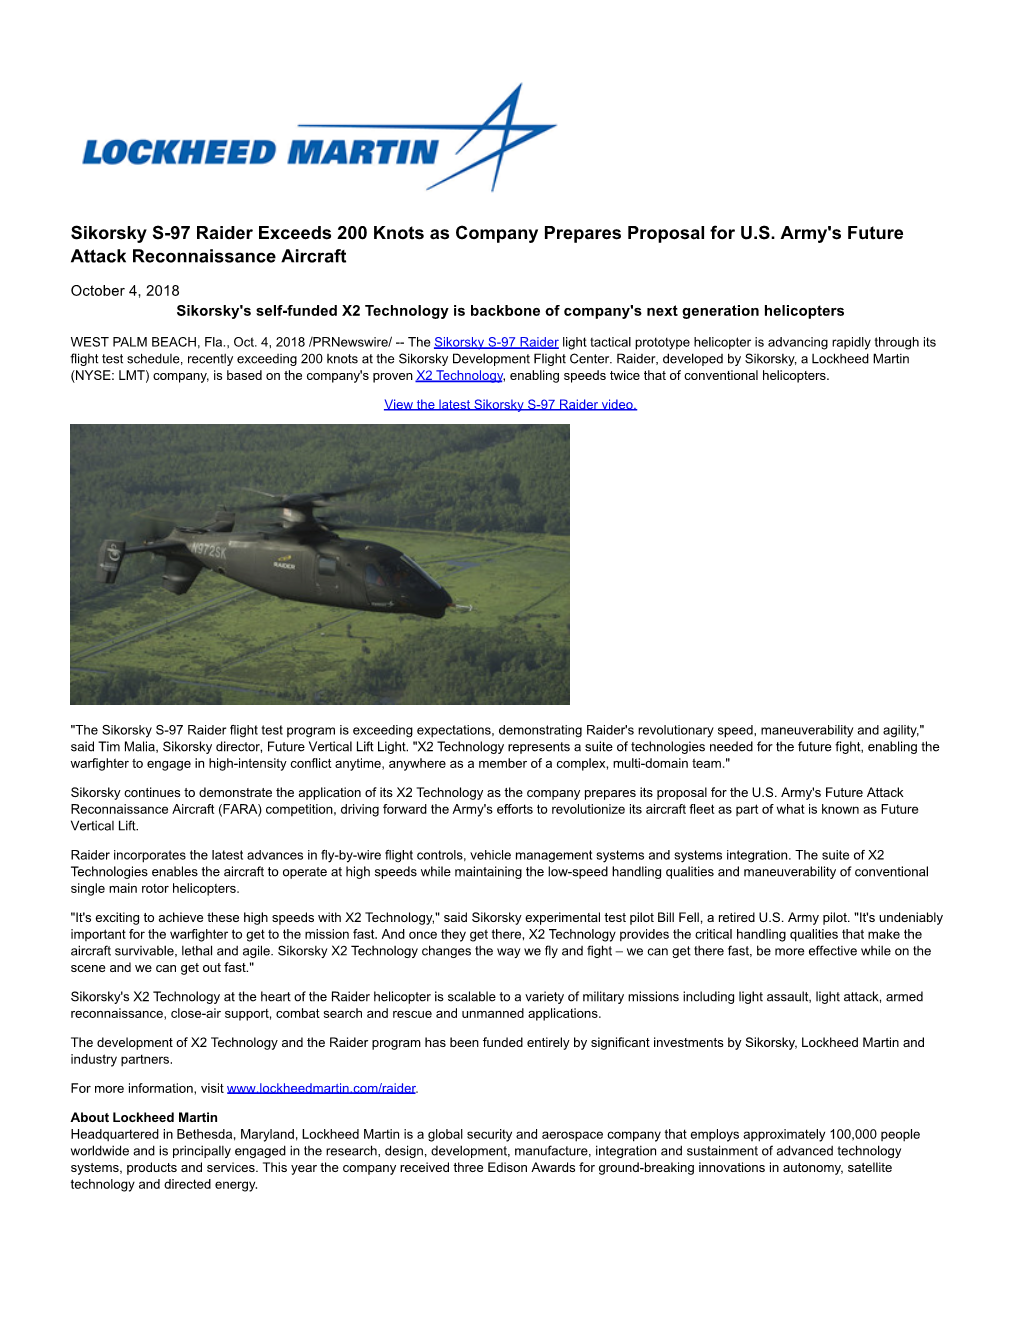 Sikorsky S-97 Raider Exceeds 200 Knots As Company Prepares Proposal for U.S. Army's Future Attack Reconnaissance Aircraft